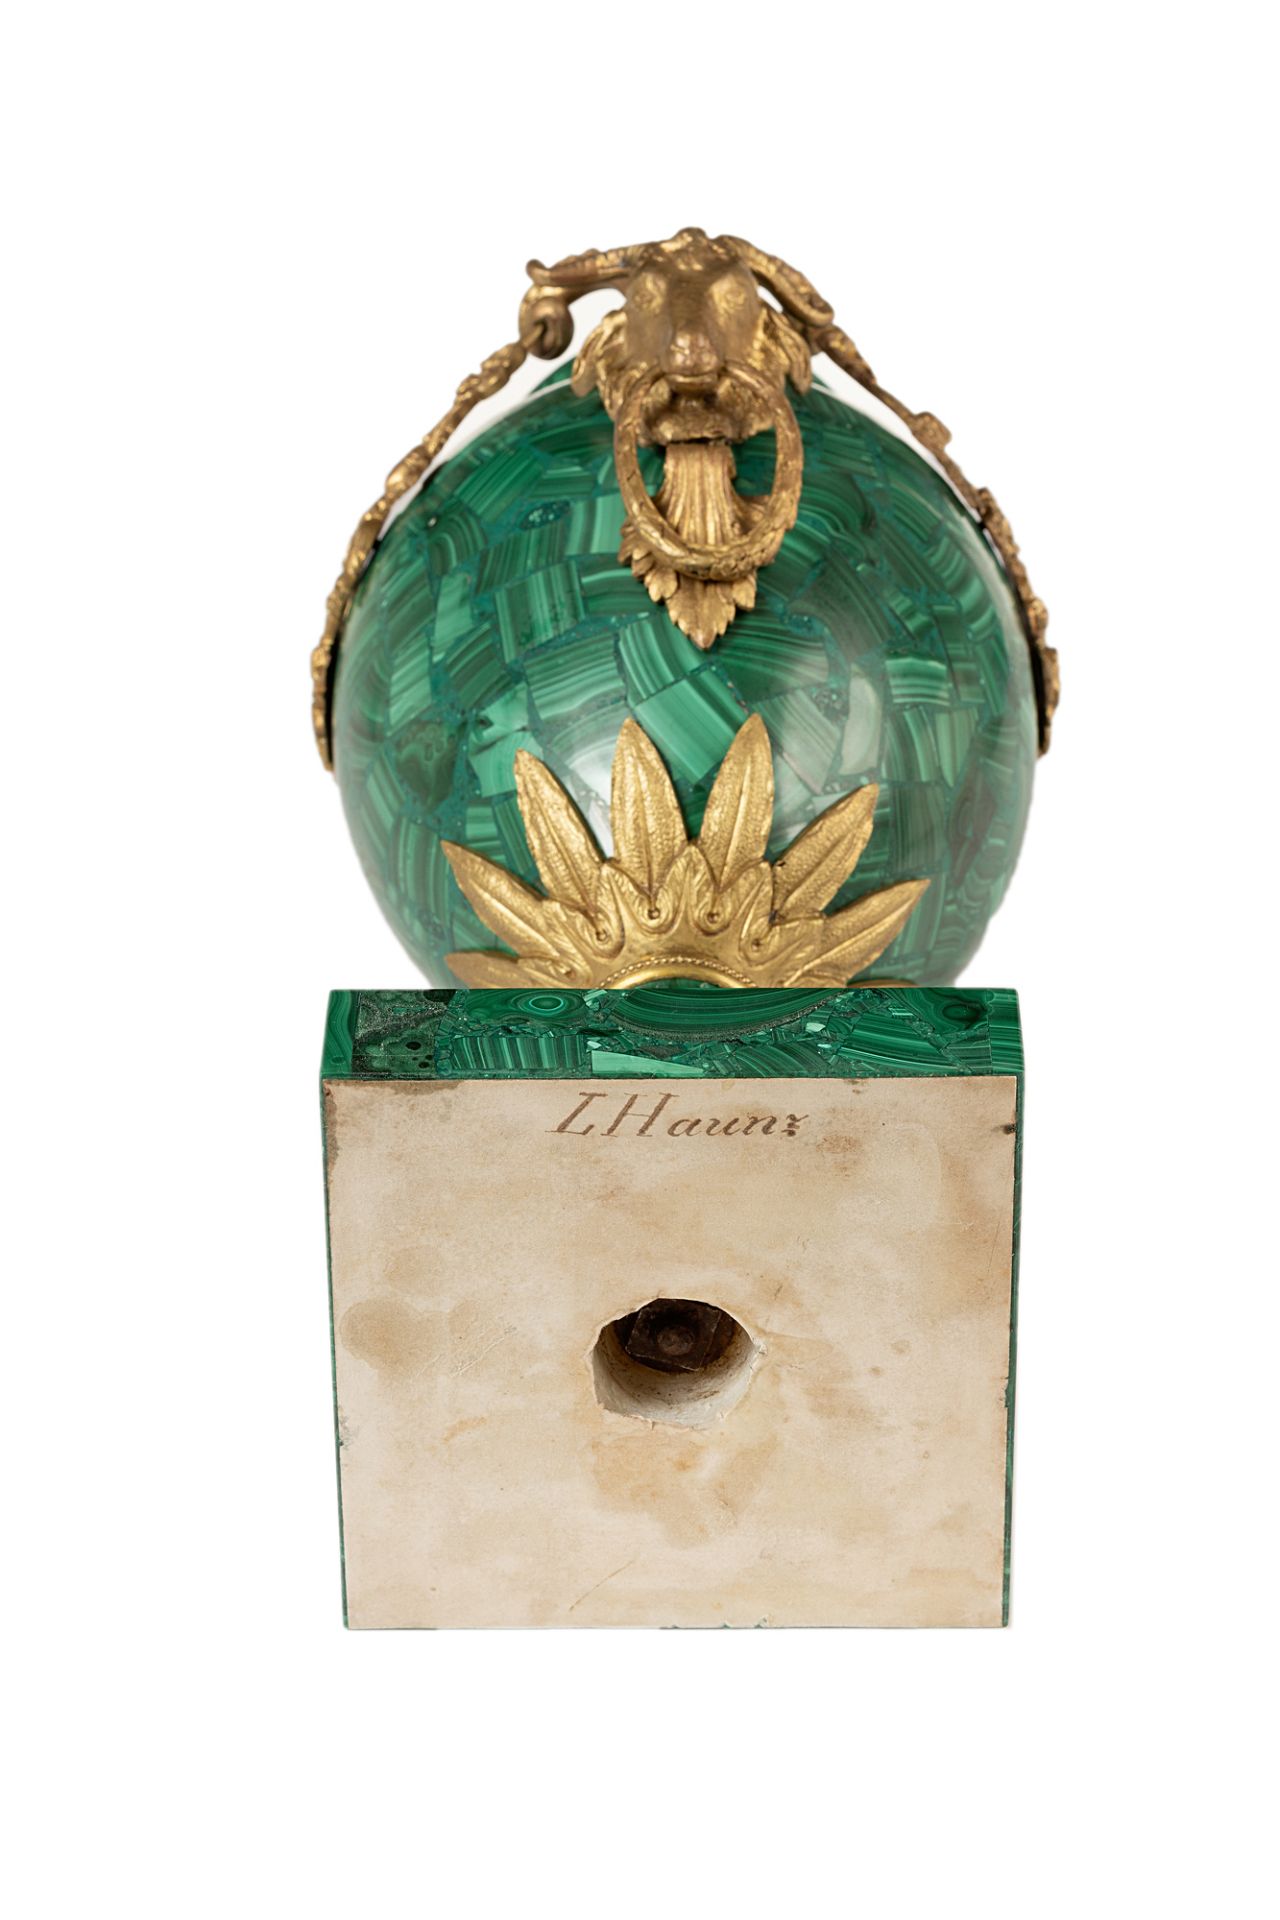 Pair of malachite vases in the style of French Early Classicism - Image 8 of 8